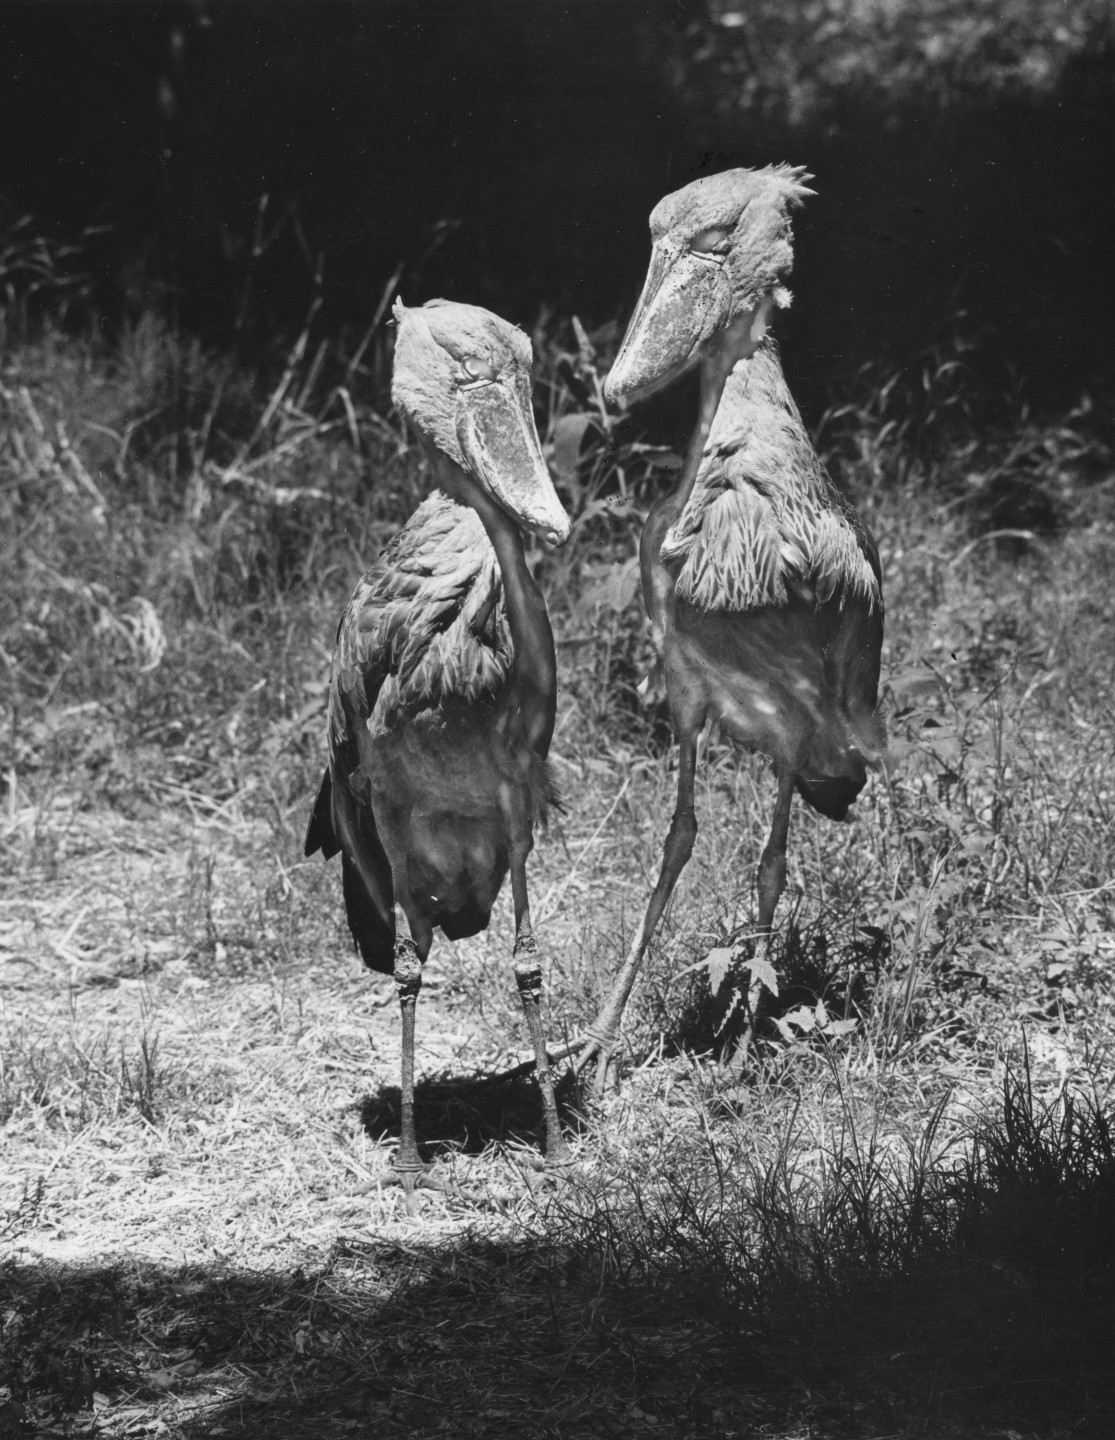 Having a pair of shoebills was a rare and wonderful thing in 1948. They made the cover of the April 1948 issue of ZOONOOZ, and editor Ken Stott, Jr. noted that the Zoo would never have been able to obtain them if it were not for the successful births of other rare animals that they were able to trade in exchange for them.